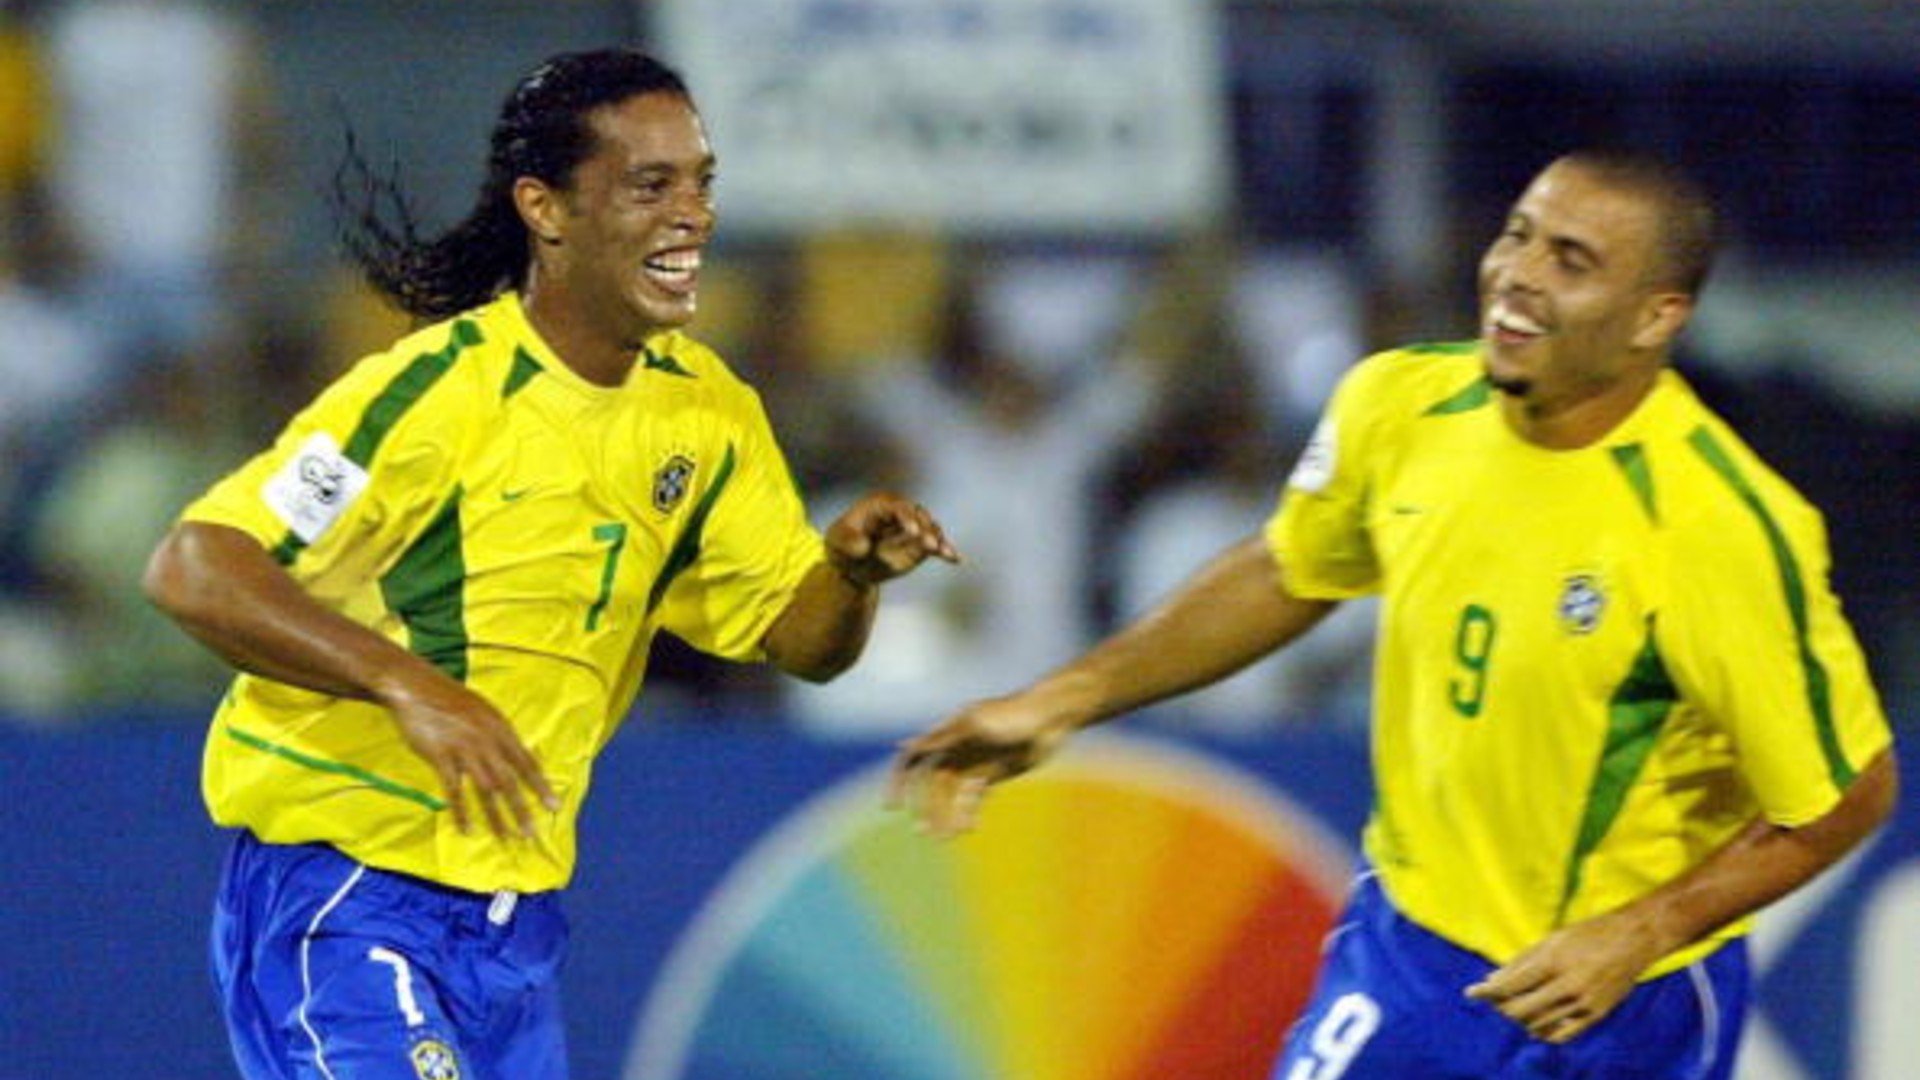 Ronaldinho's debut for Brazil - Who were his teammates and where are they now?